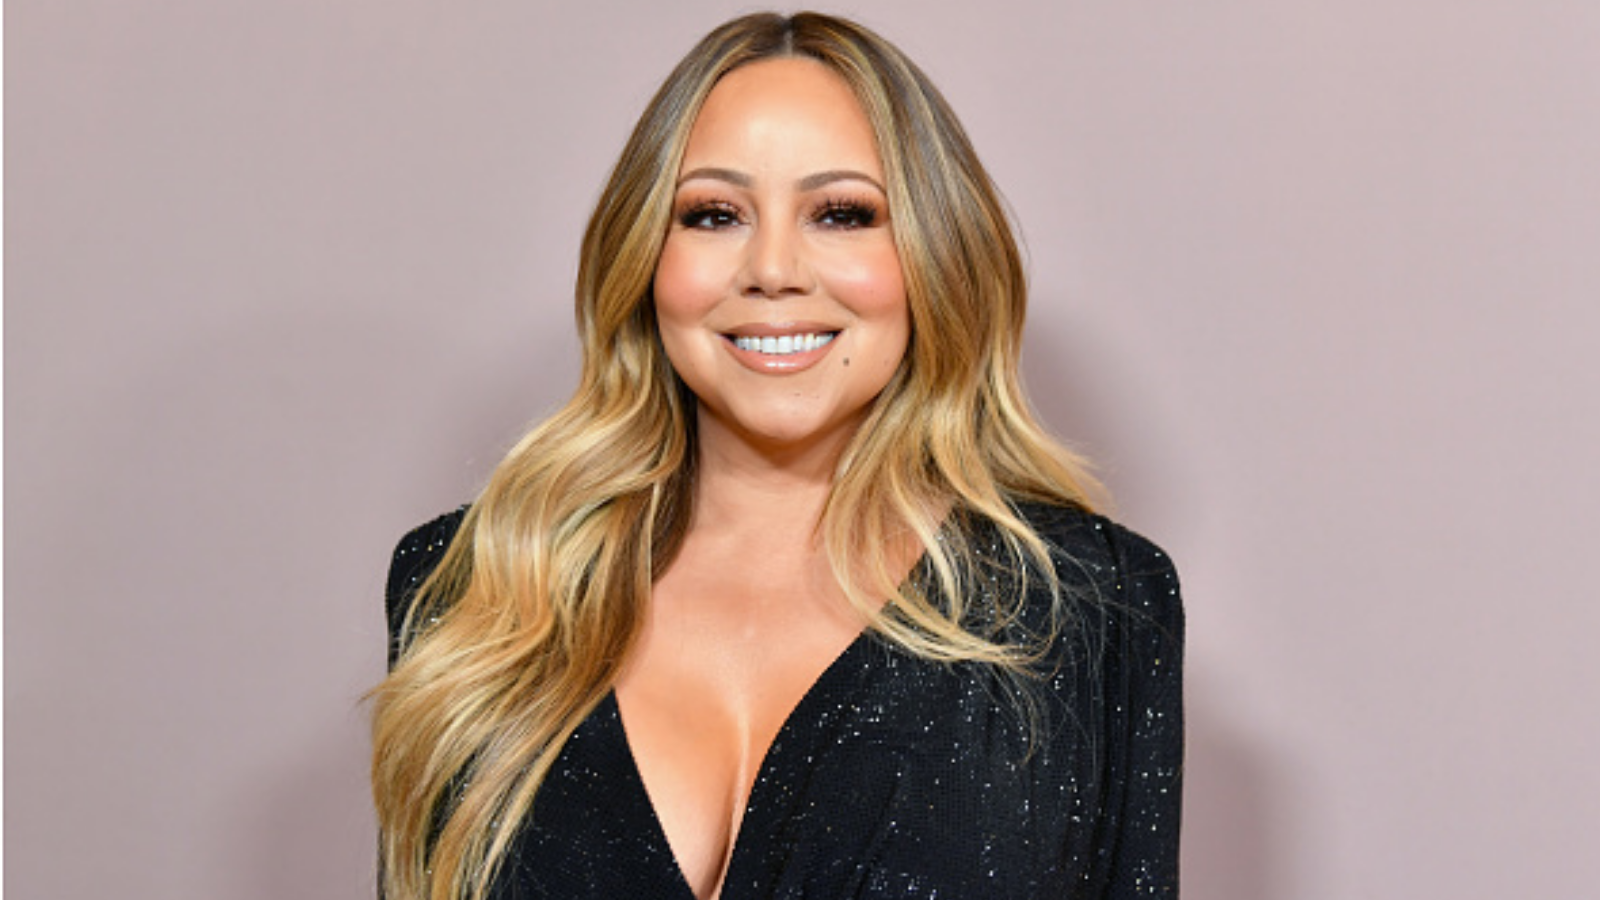 Twitter Compares Mariah Carey To ‘Euphoria’ Characters And We Can’t Unsee It